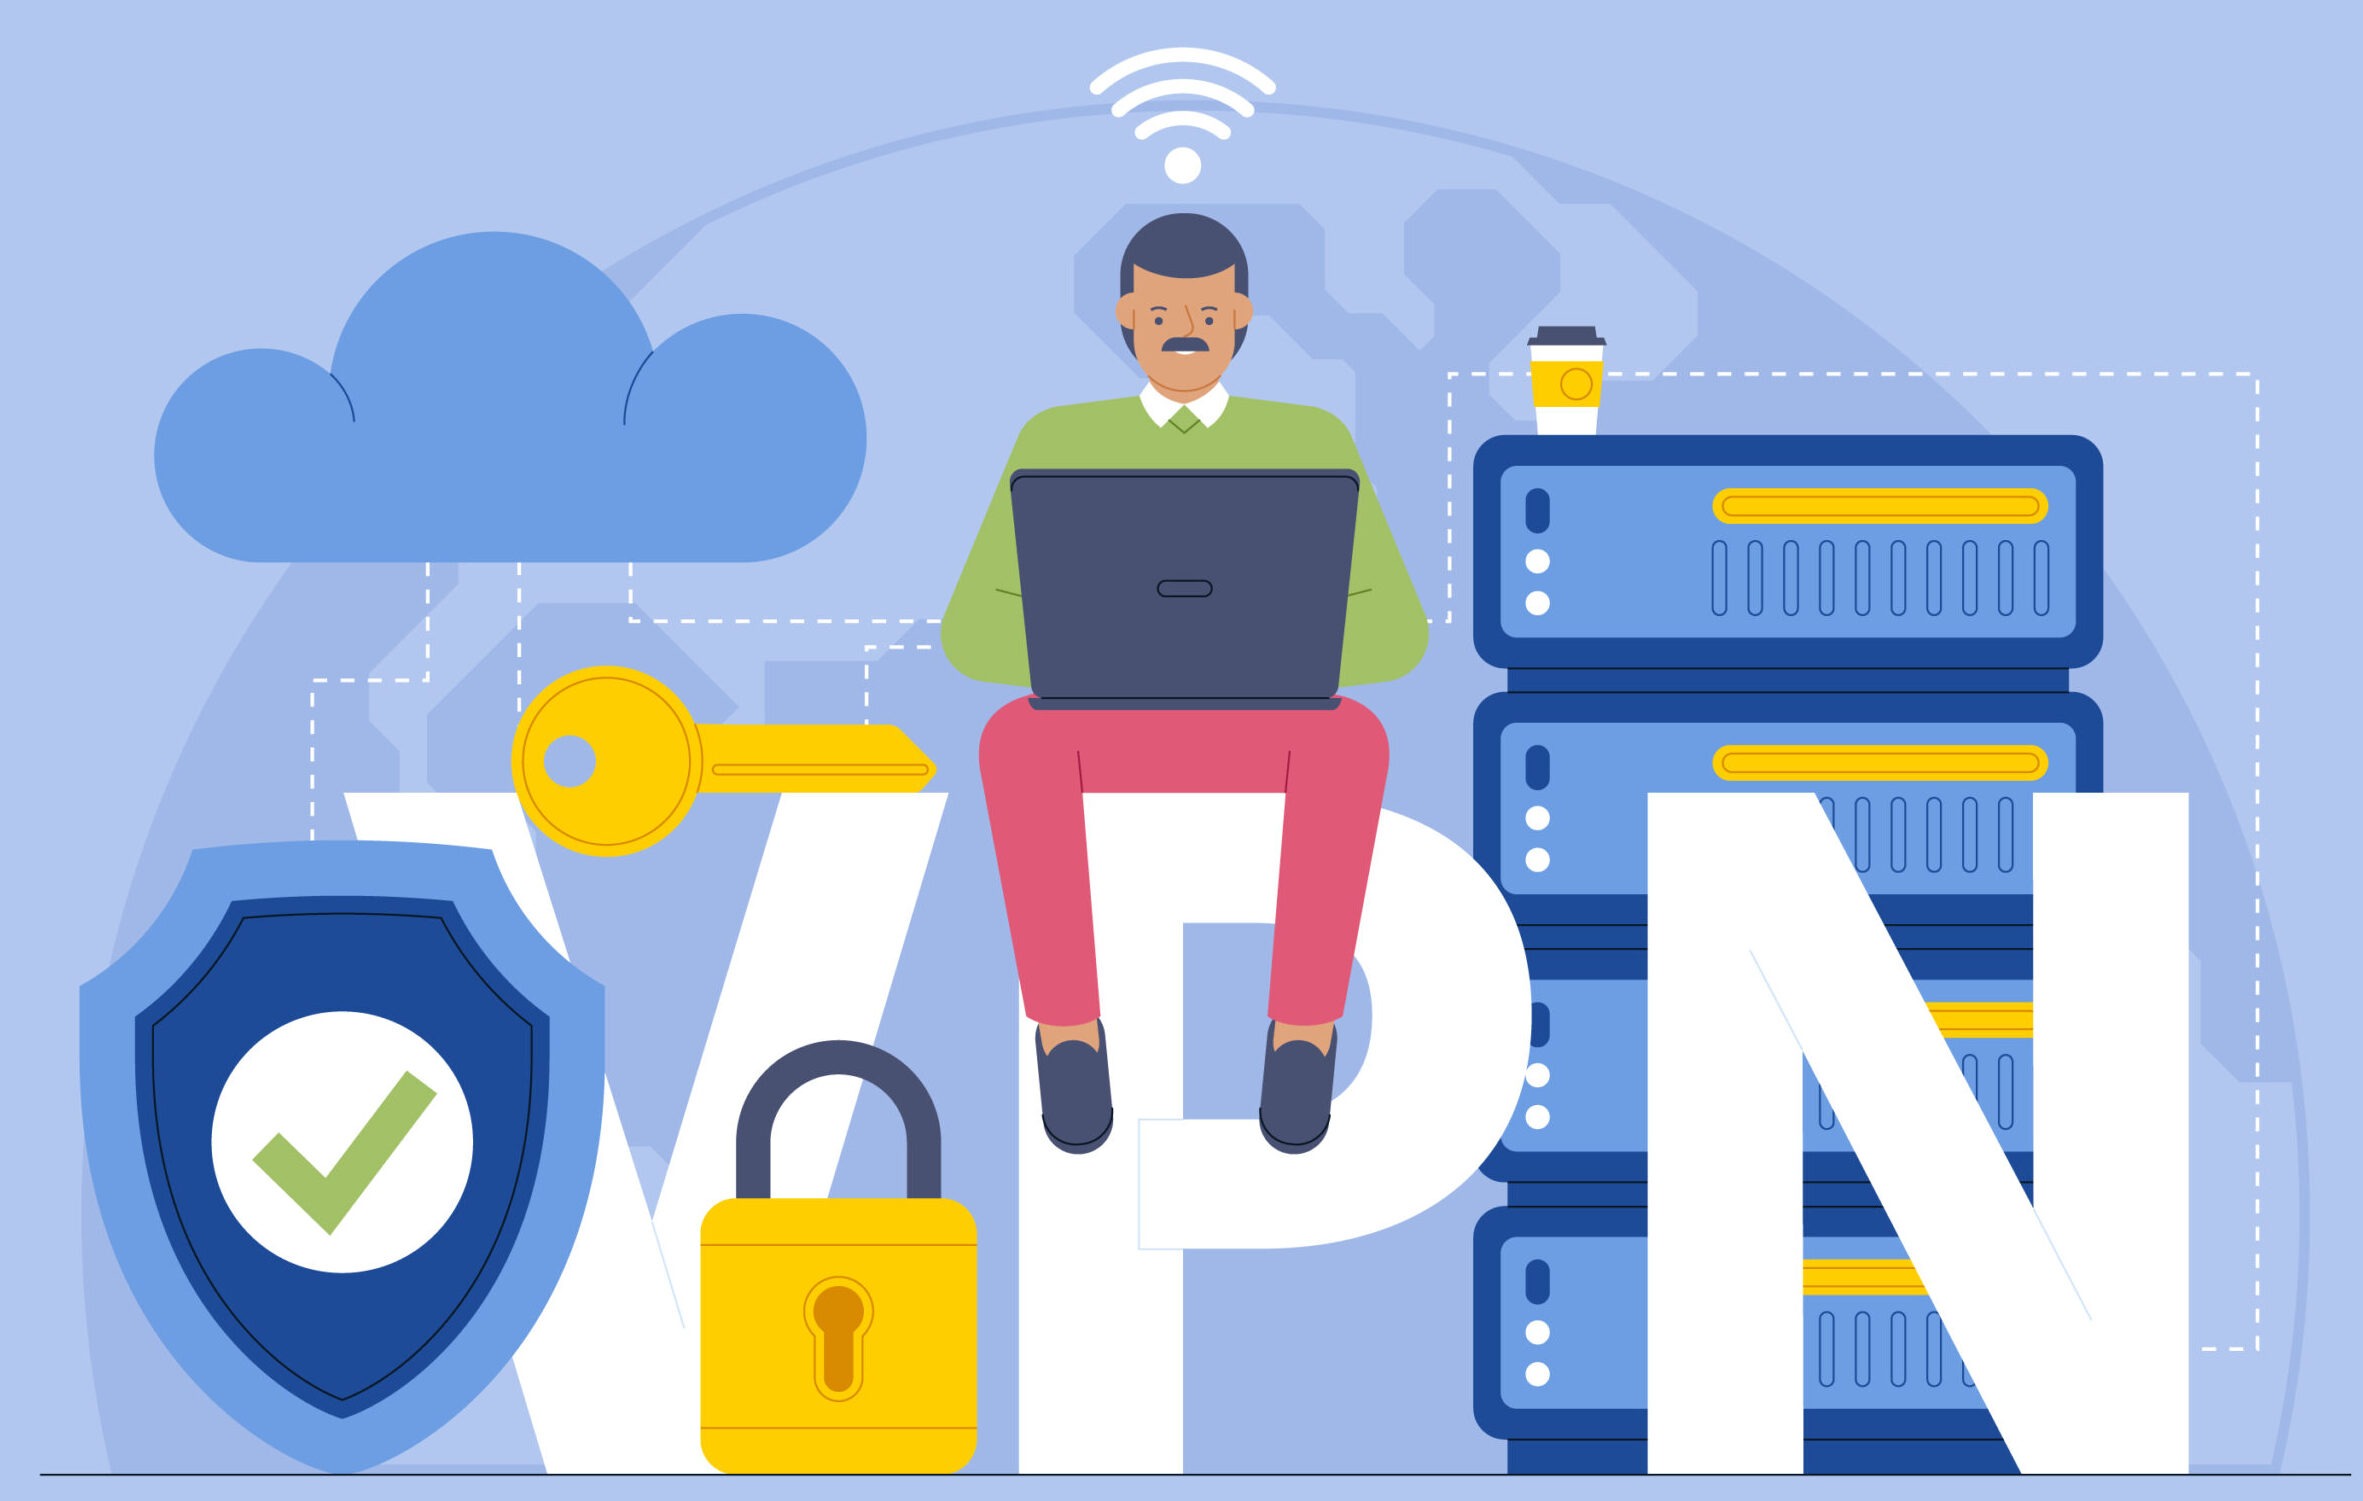 Why Using a VPN for Torrenting Makes Sense